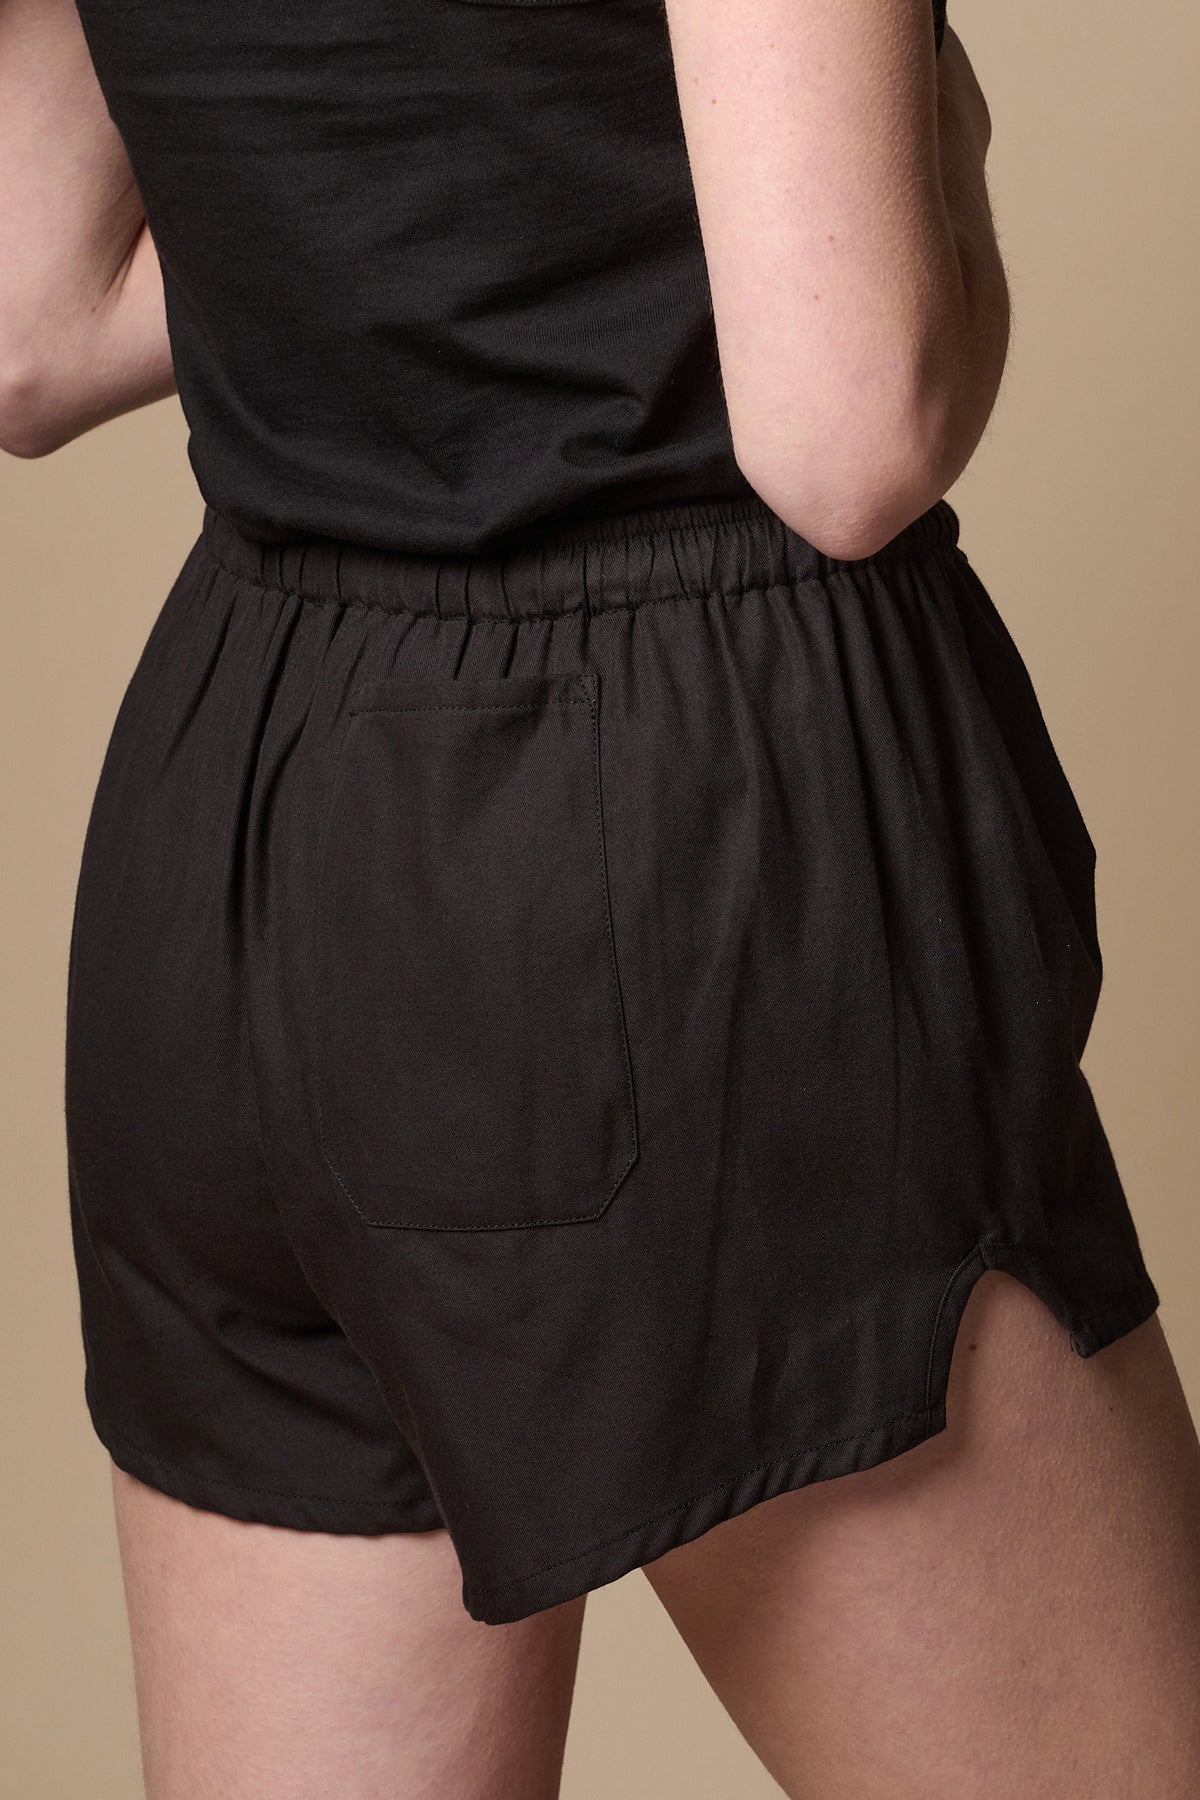 
            Back of female wearing lightweight sports short plastic free in black with back pocket on right leg